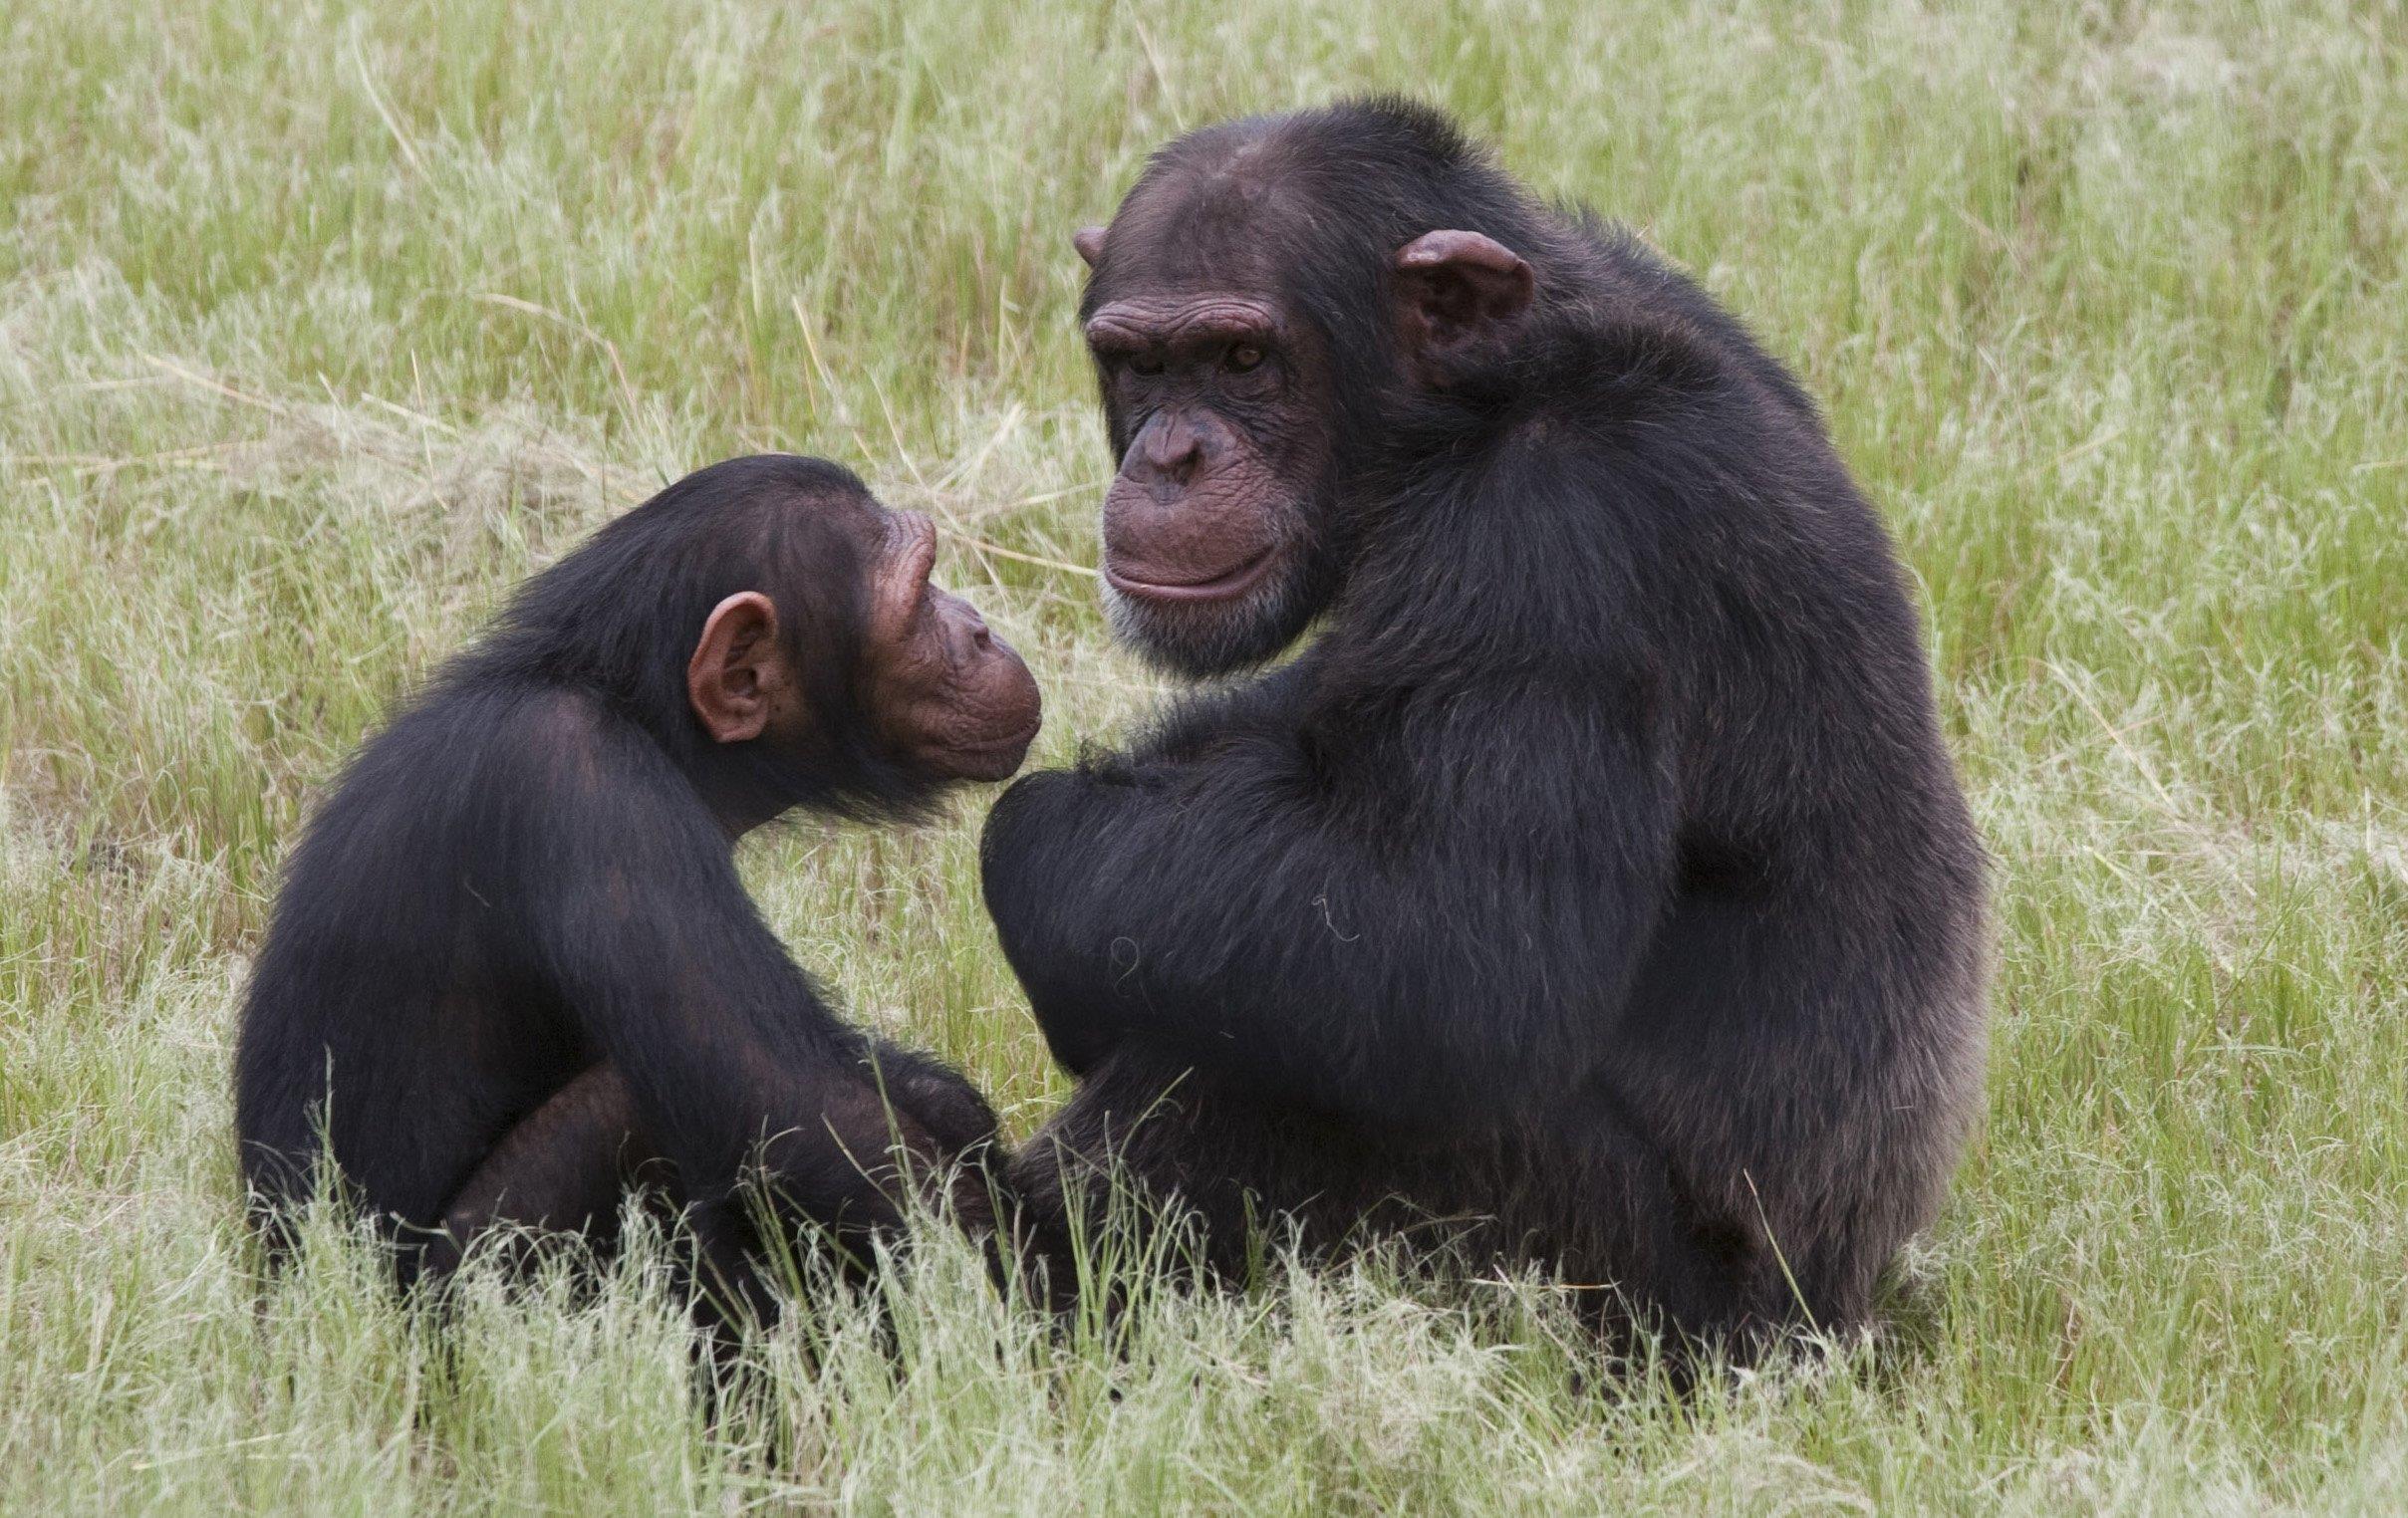 Pet Primates: Chimps Raised by Humans Have Social Problems as Adults ...